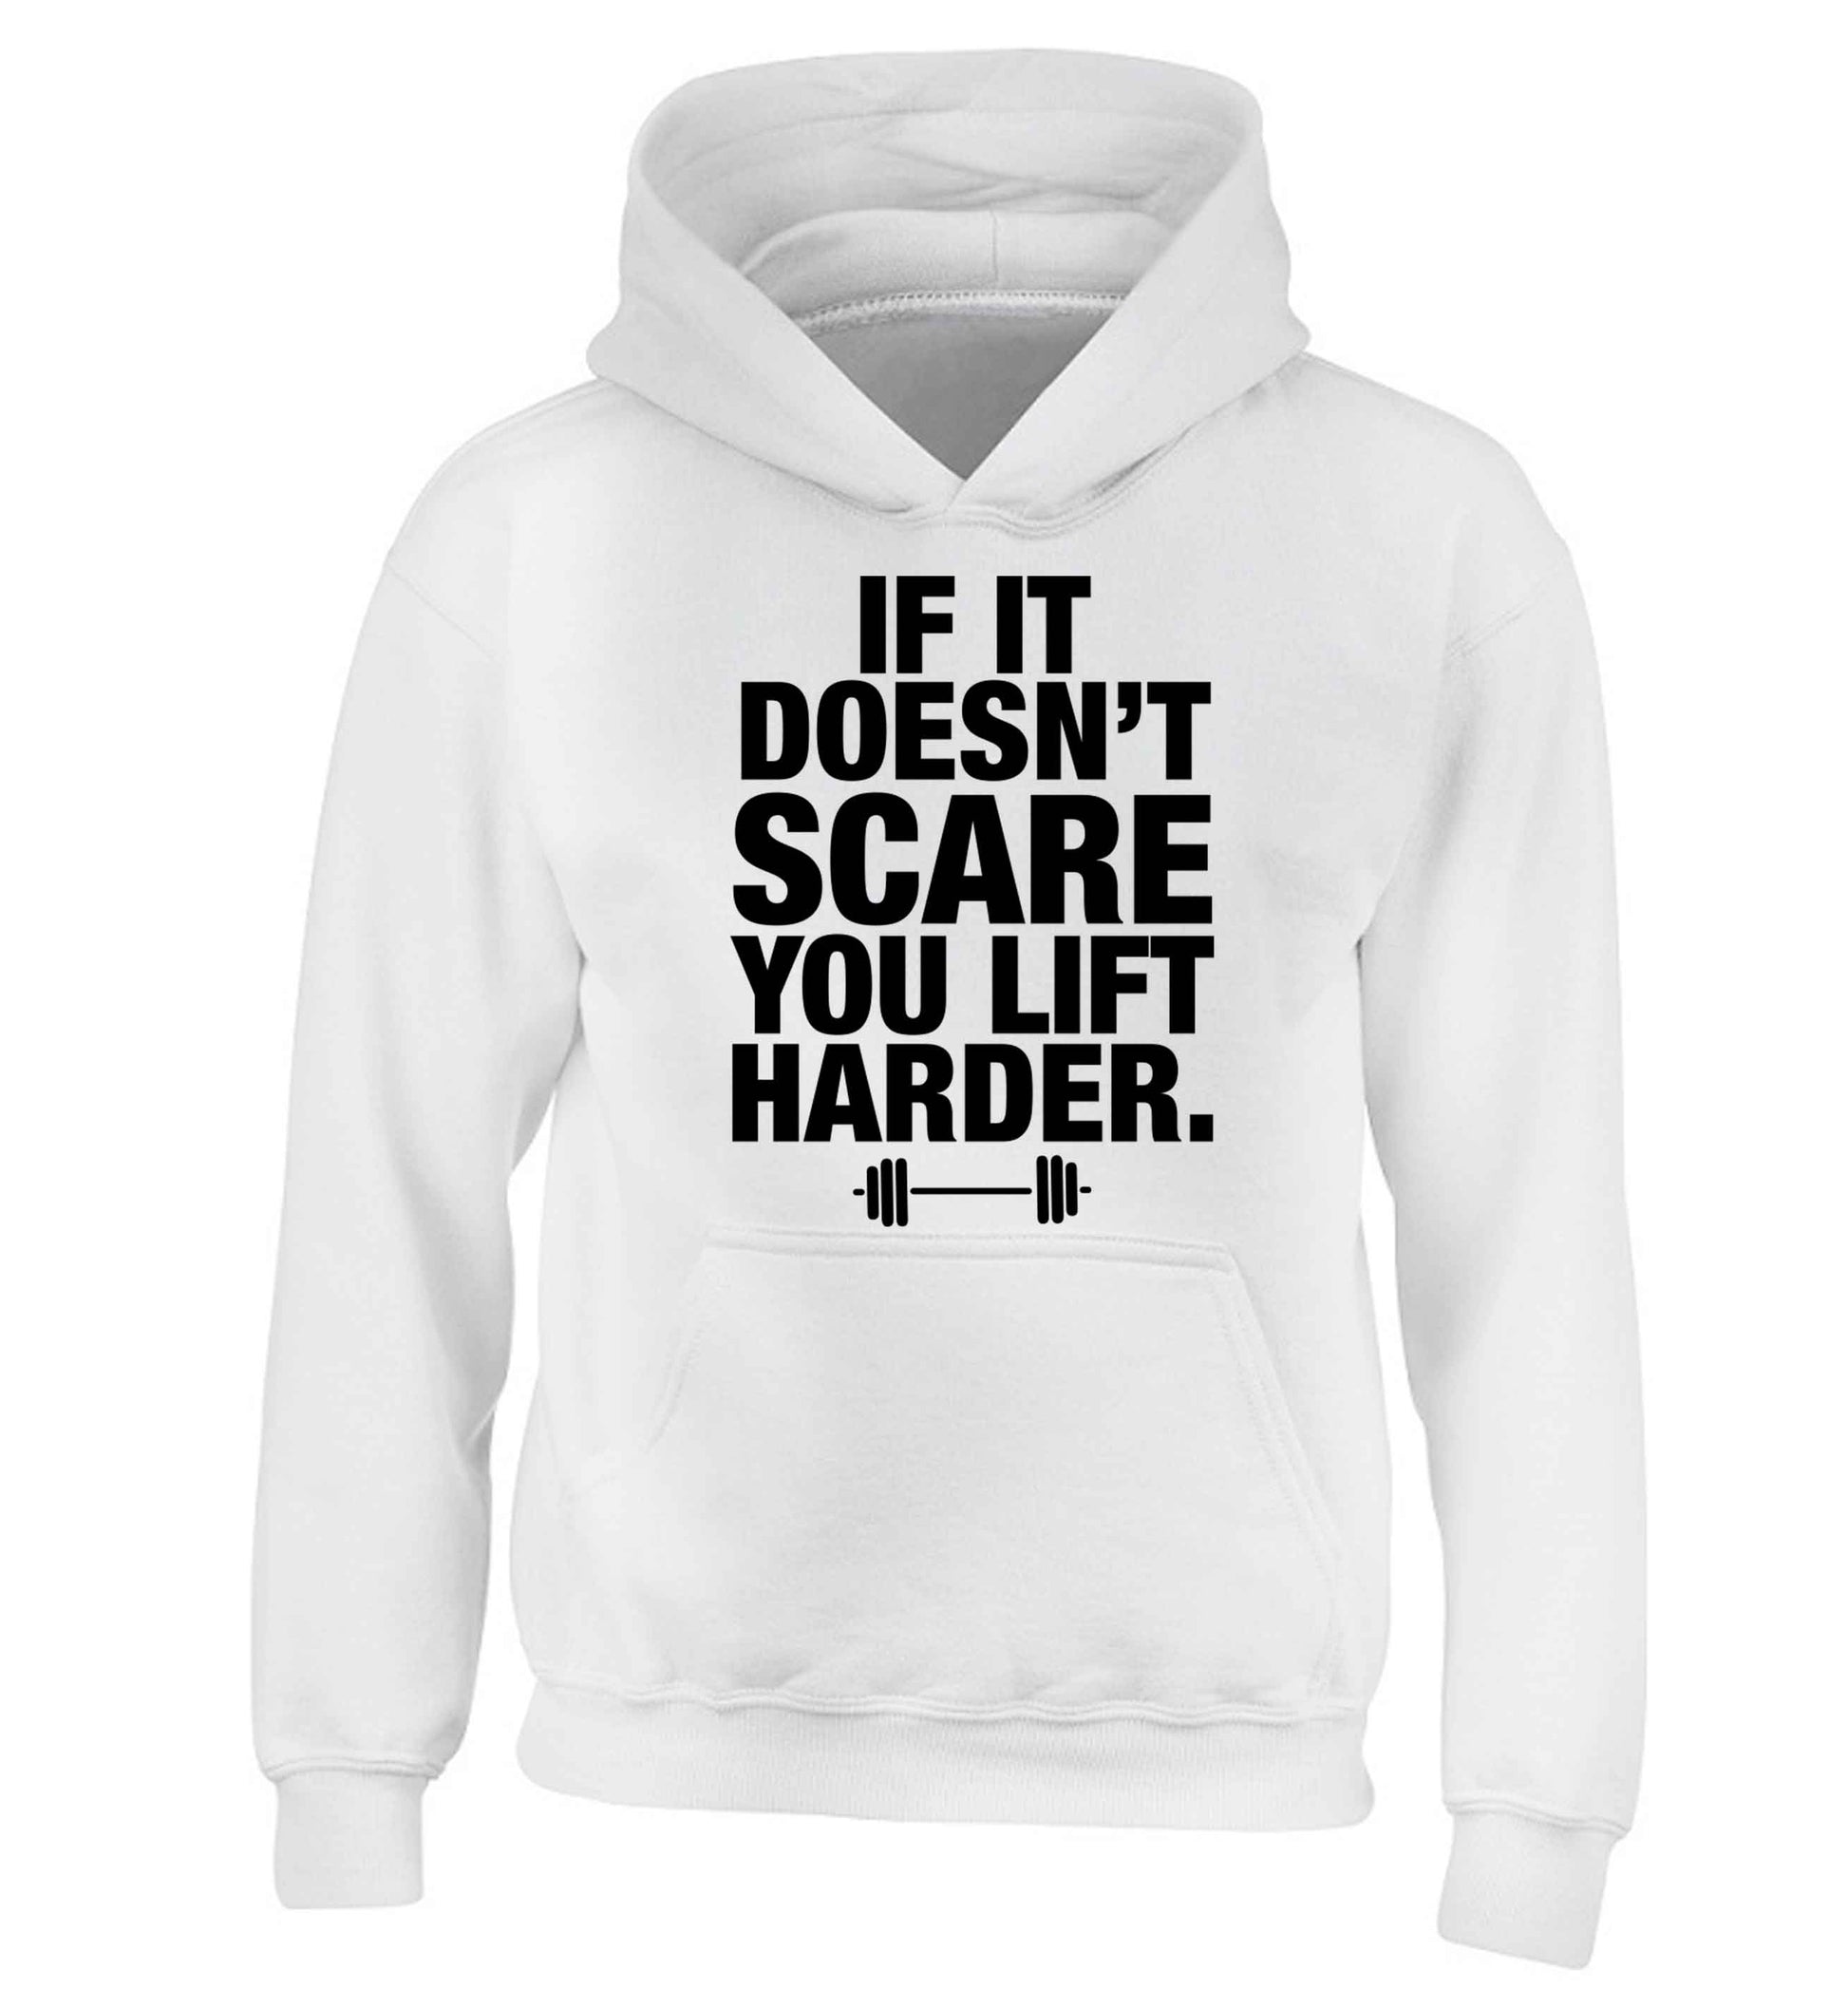 If it doesnt' scare you lift harder children's white hoodie 12-13 Years